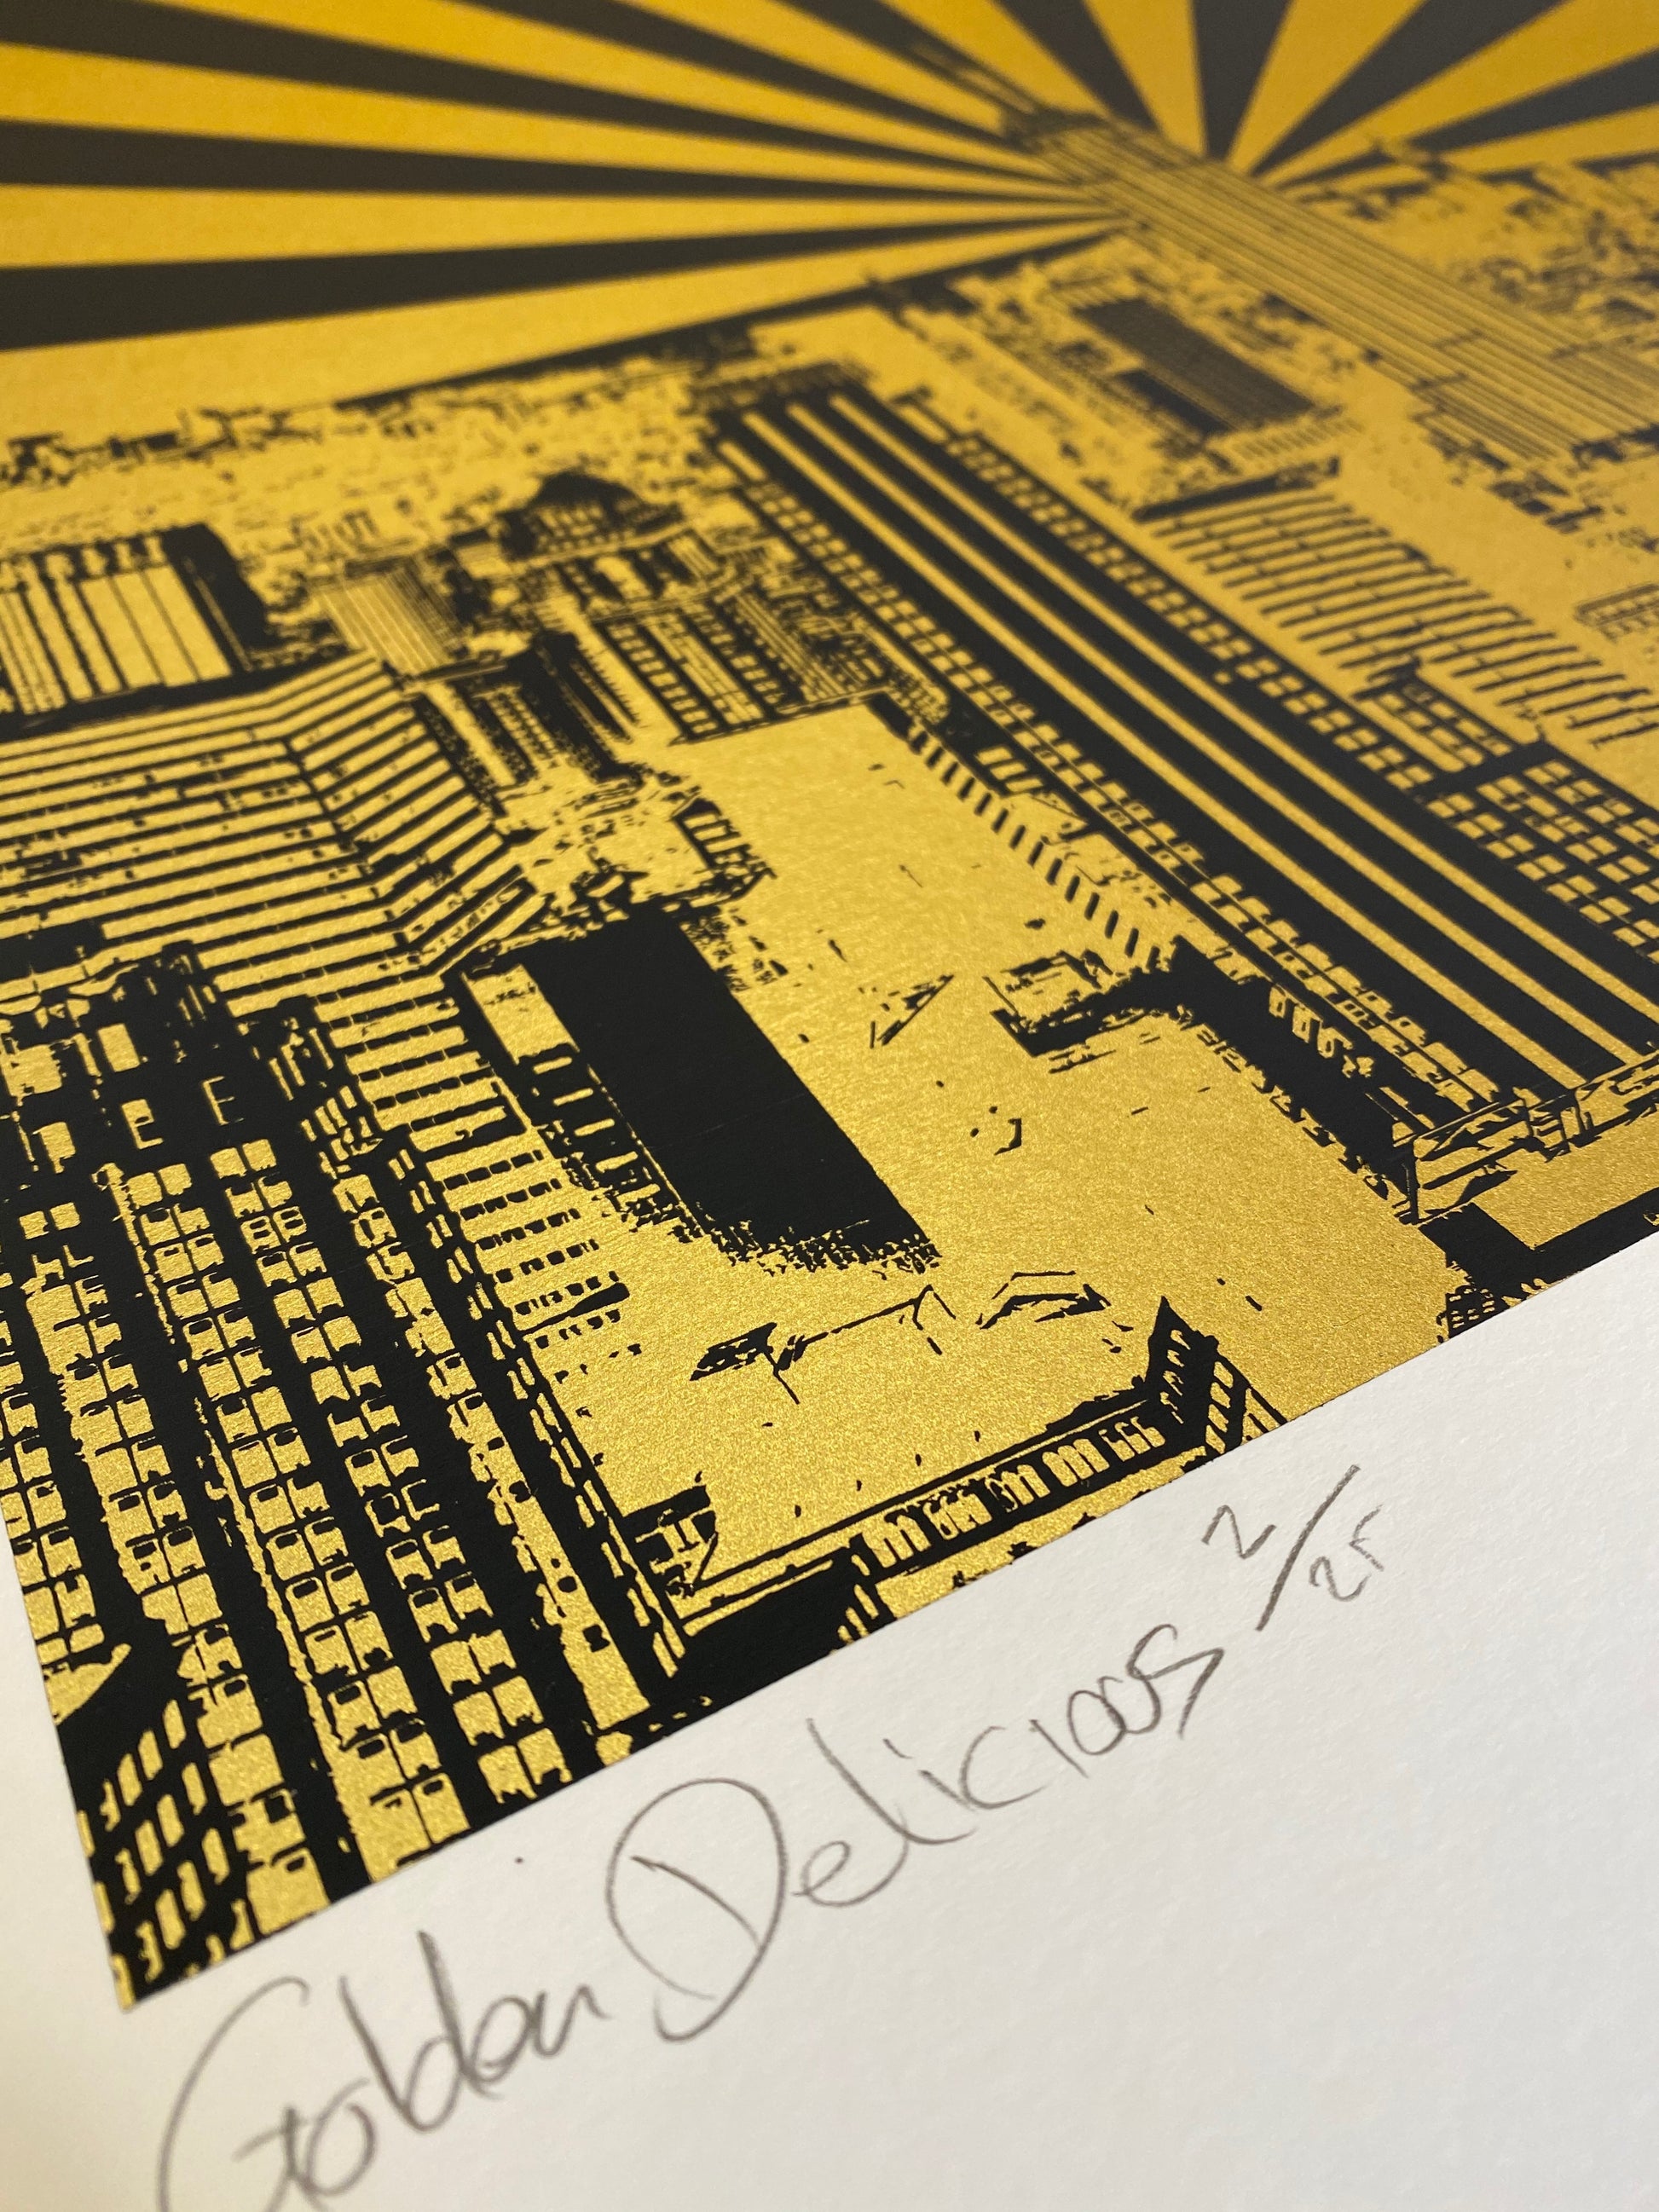 jayson lilley artist golden delicious screen print of new york city featuring gold leaf and navy stripes